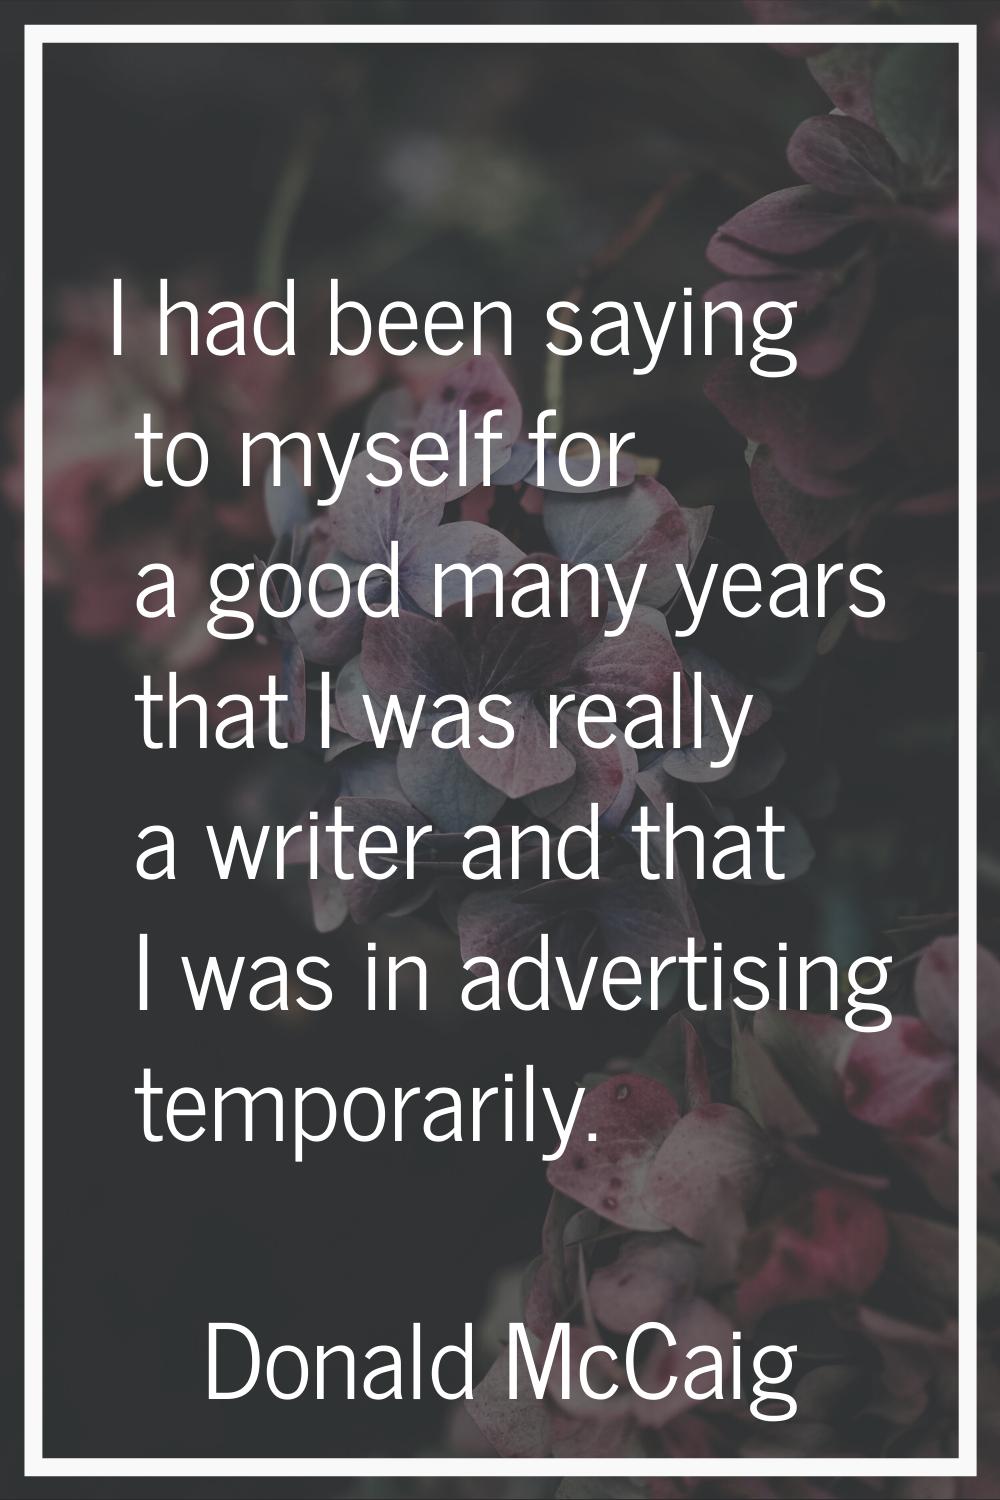 I had been saying to myself for a good many years that I was really a writer and that I was in adve